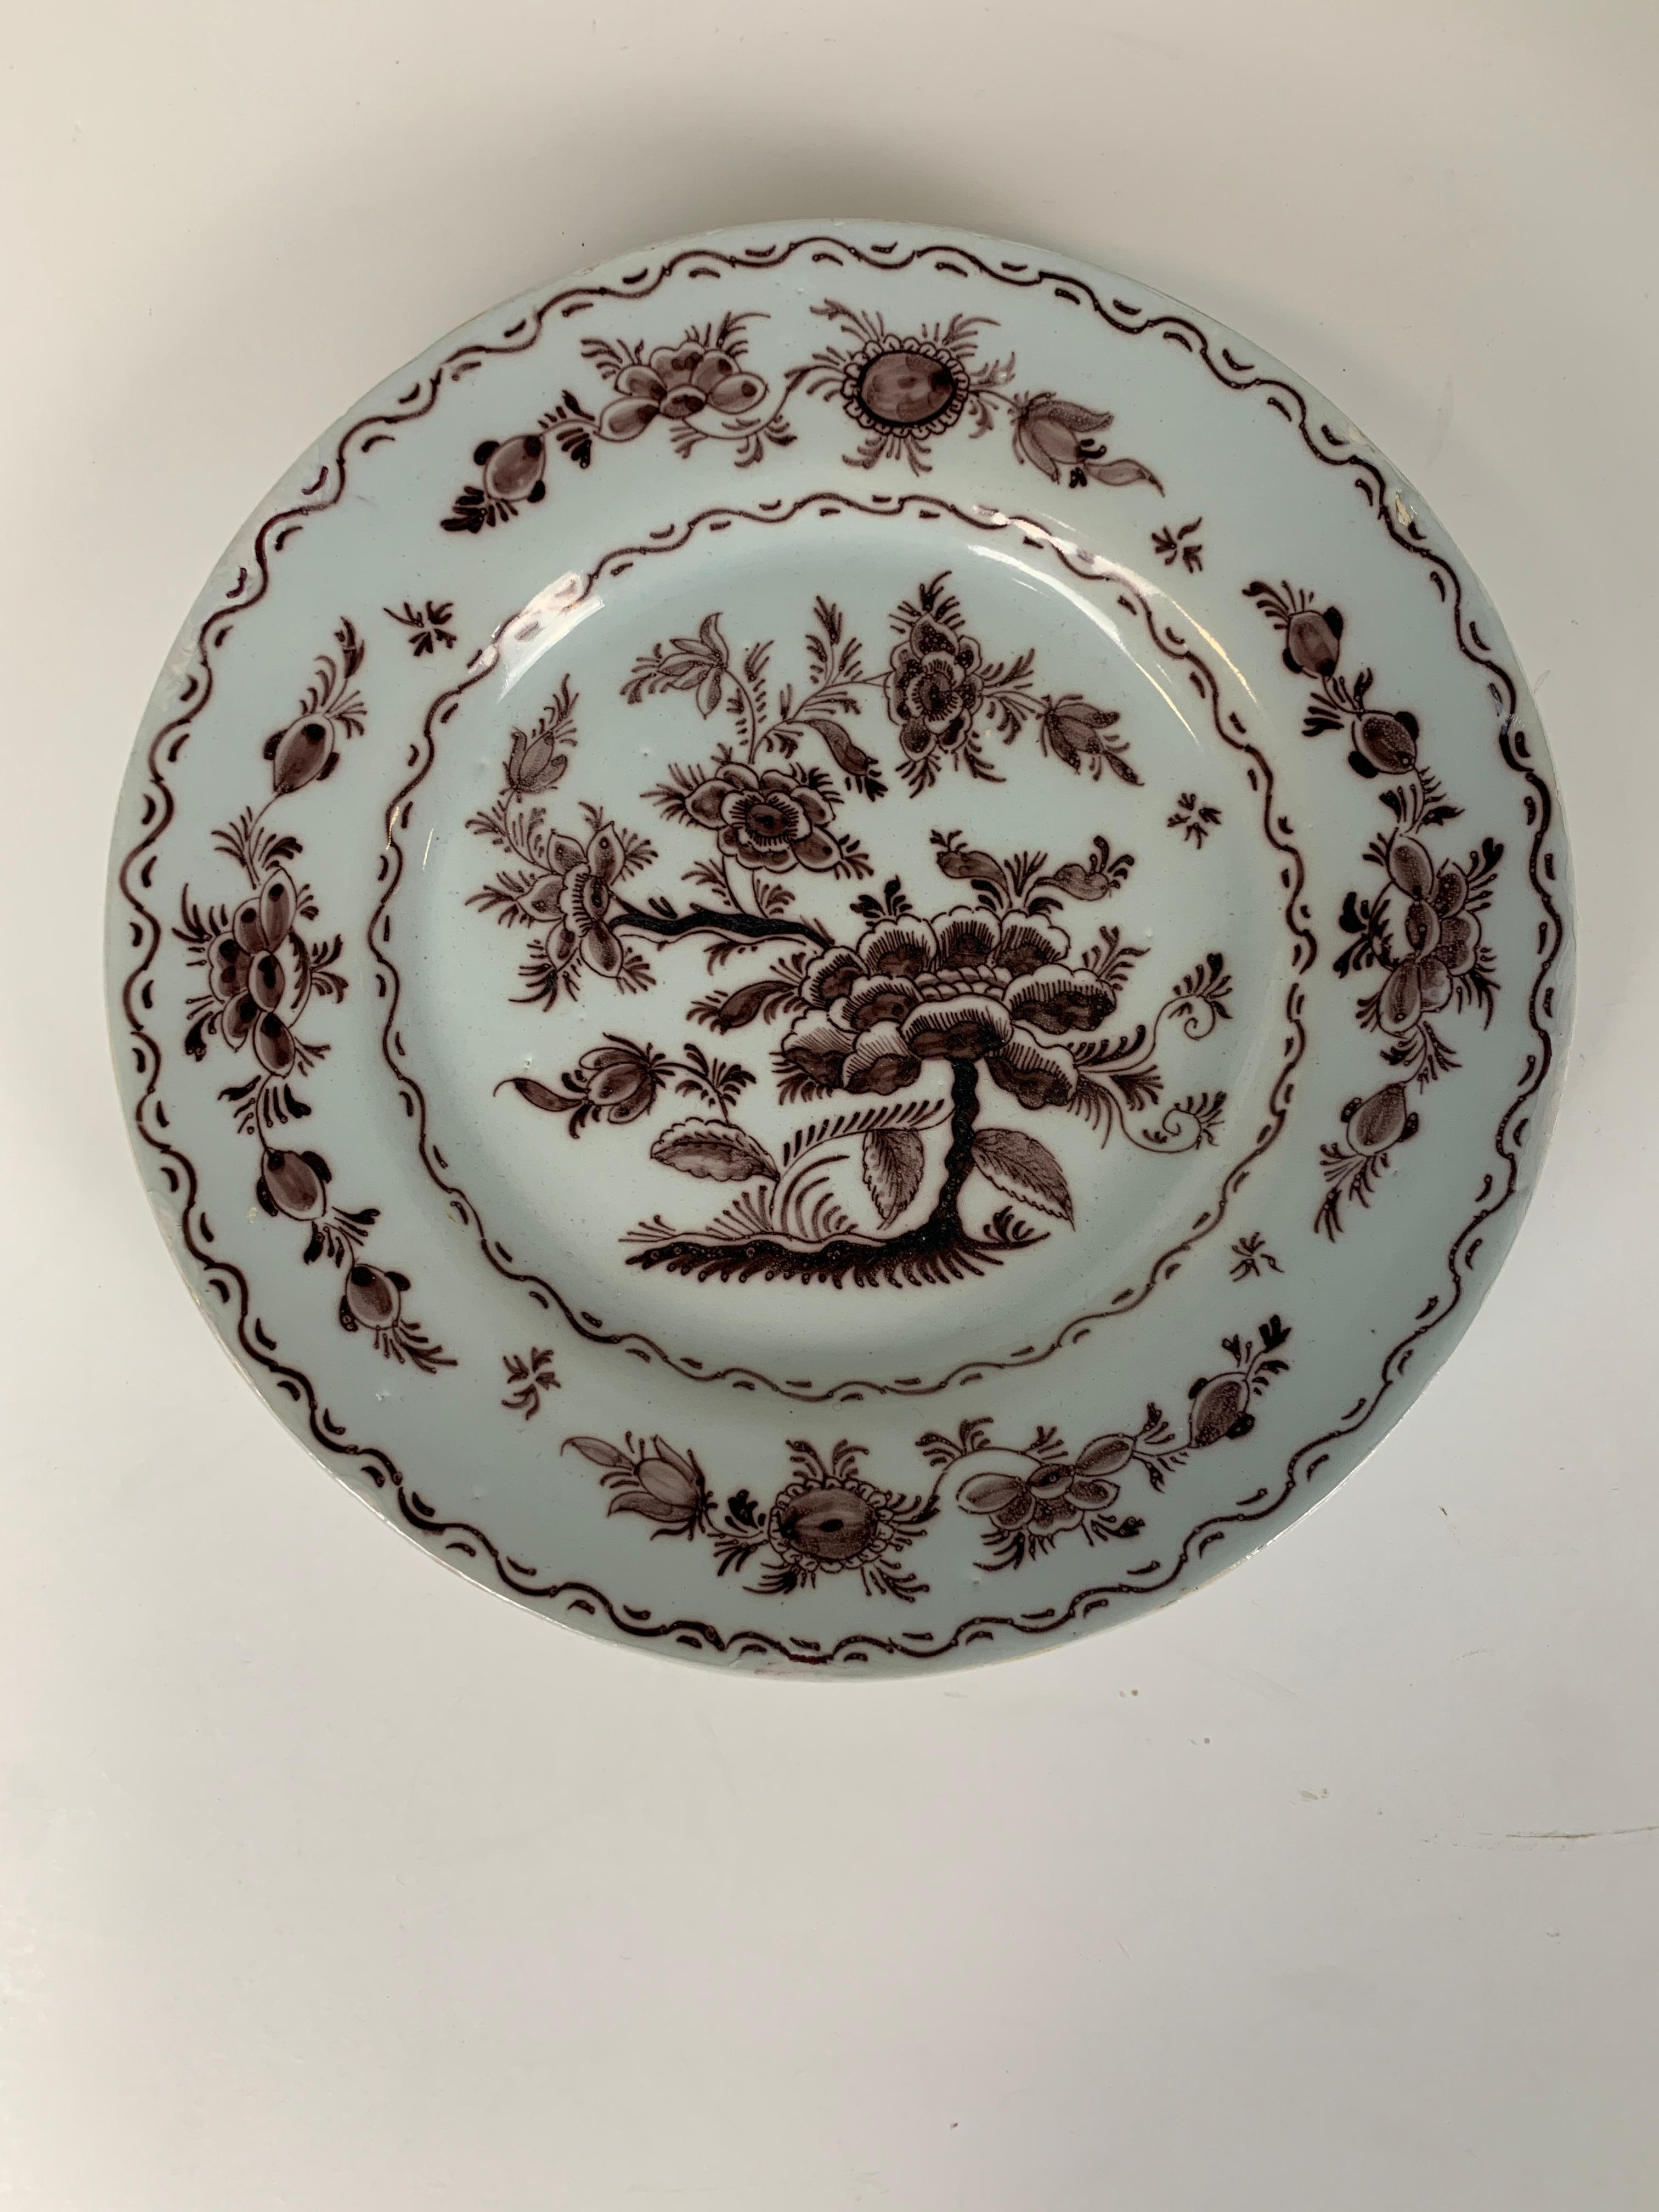 A set of five antique Dutch Delft dishes beautifully hand painted with manganese-based purple.
 The dishes show a peony plant in full bloom. 
The maker was Hugo Brouwer. Brouwer created the design, and each dish would have been hand-painted in his